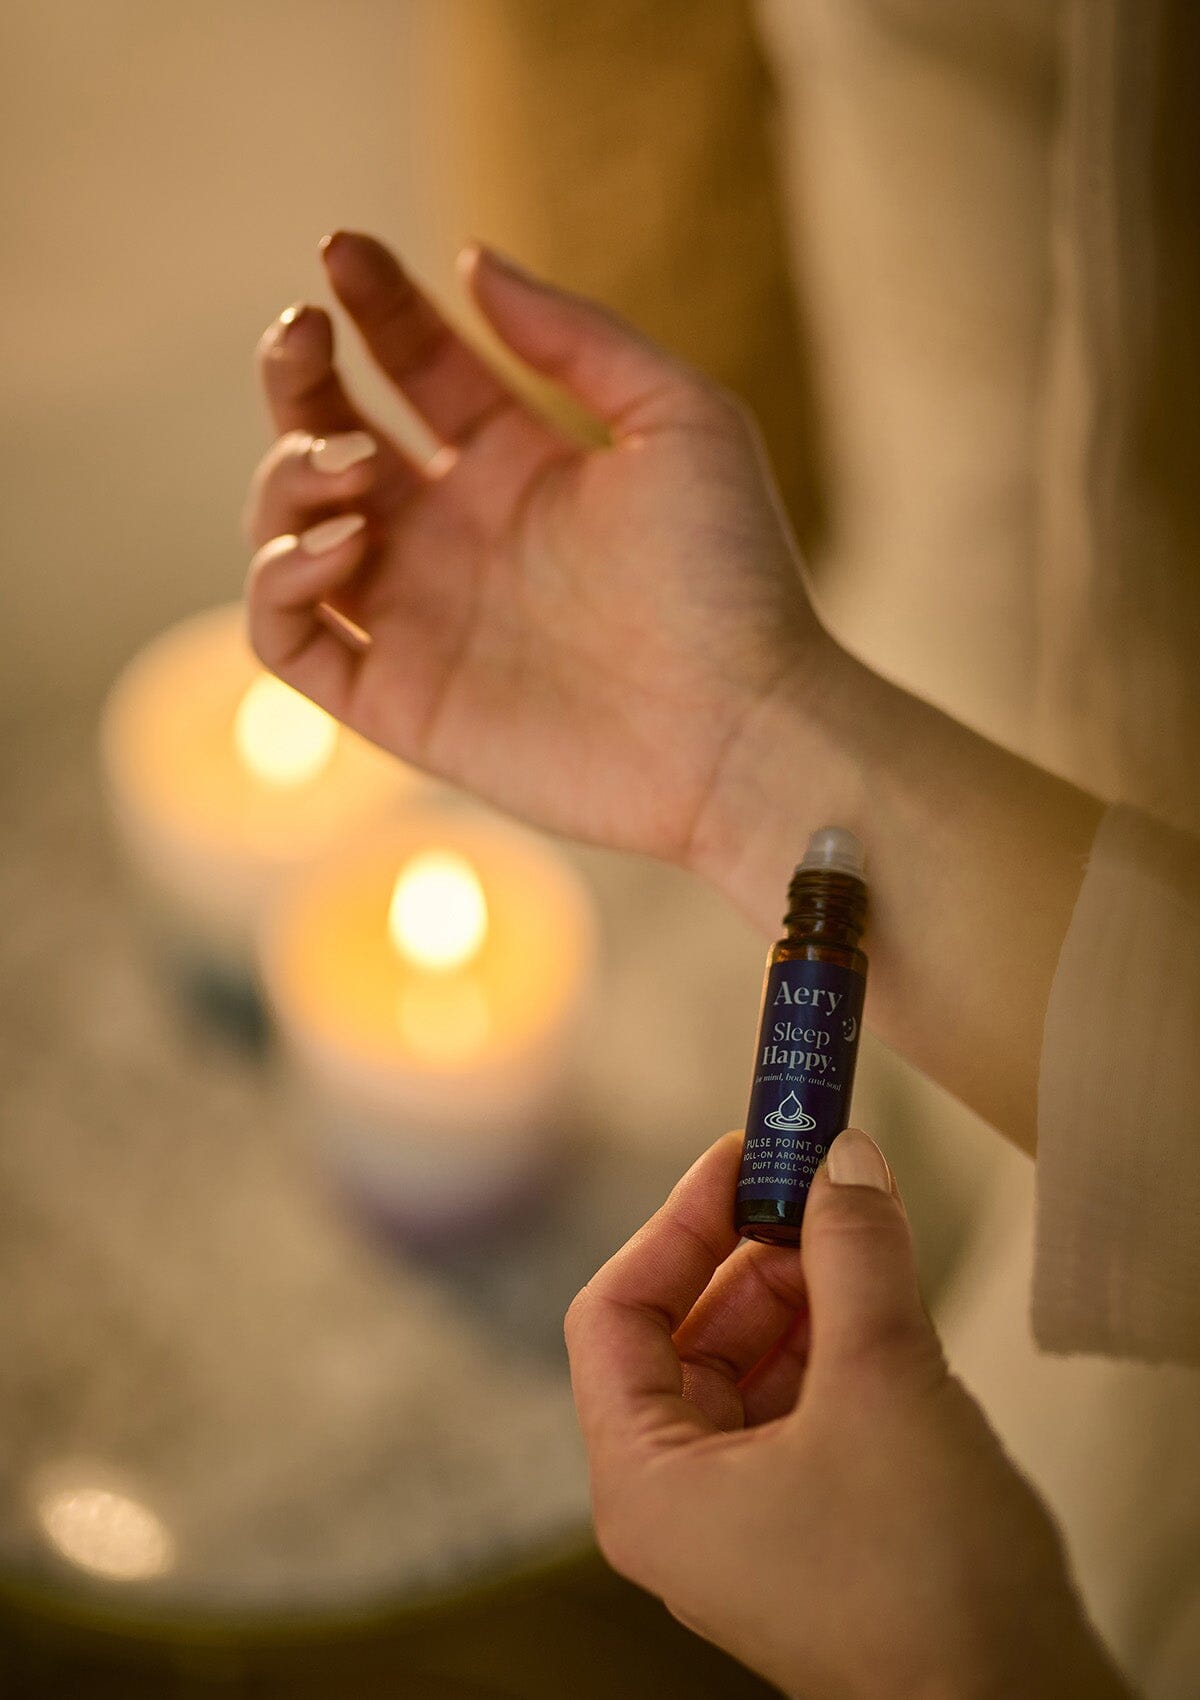 Blue Sleep Happy pulse point oil by Aery displayed in hands 